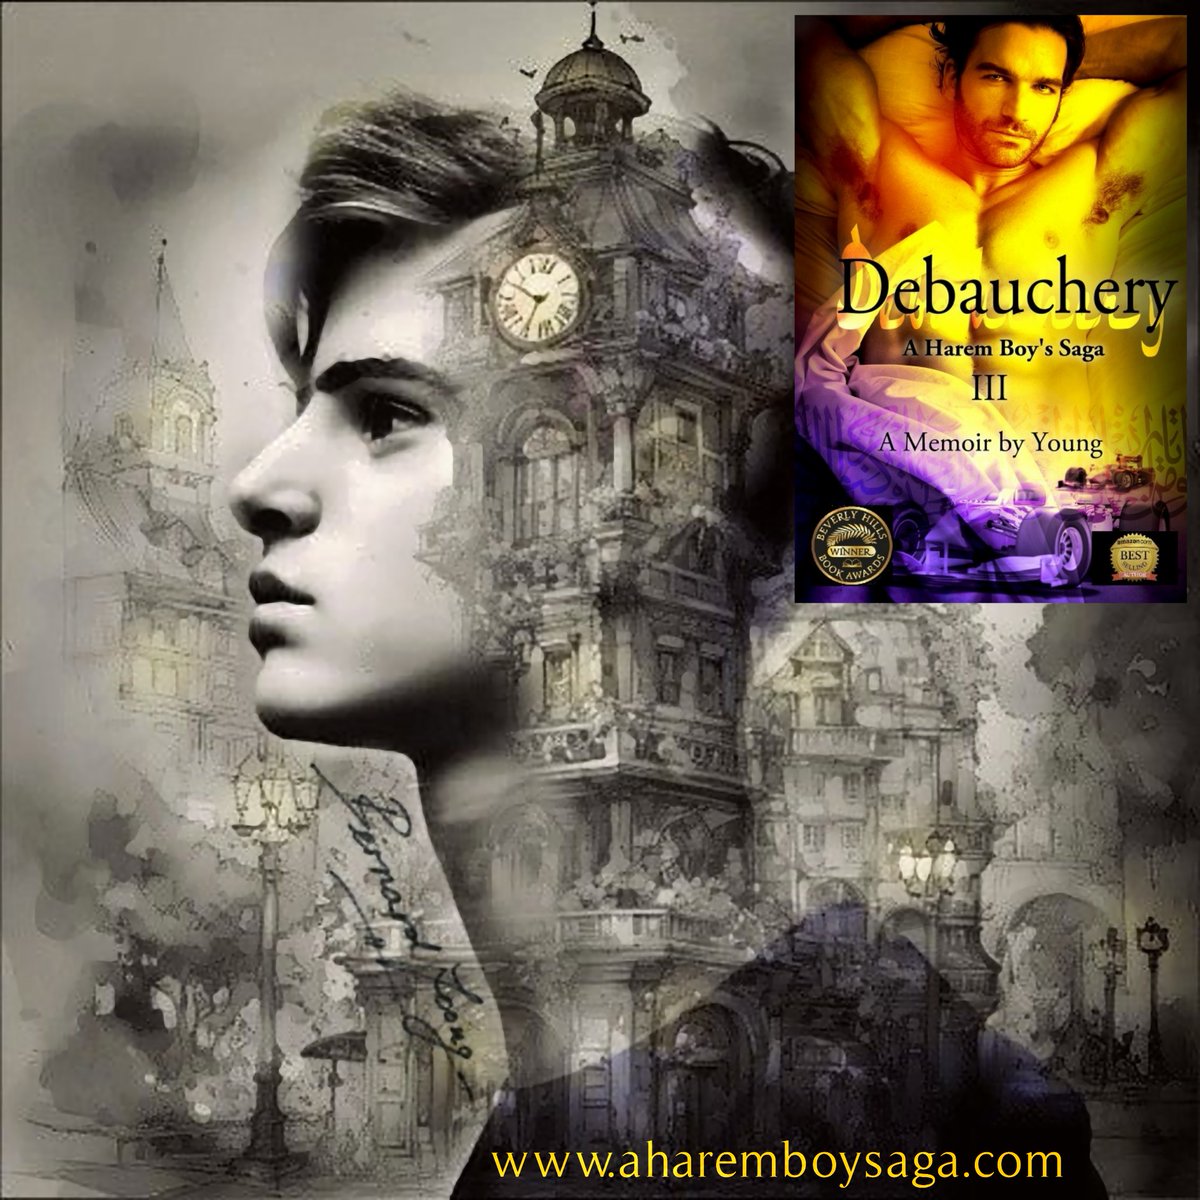 There is only one happiness in this life, to love and be loved. A Harem Boy's Saga - Book III - DEBAUCHERY; a memoir by Young getBook.at/DEBAUCHERY #AuthorUproar #BookBoost